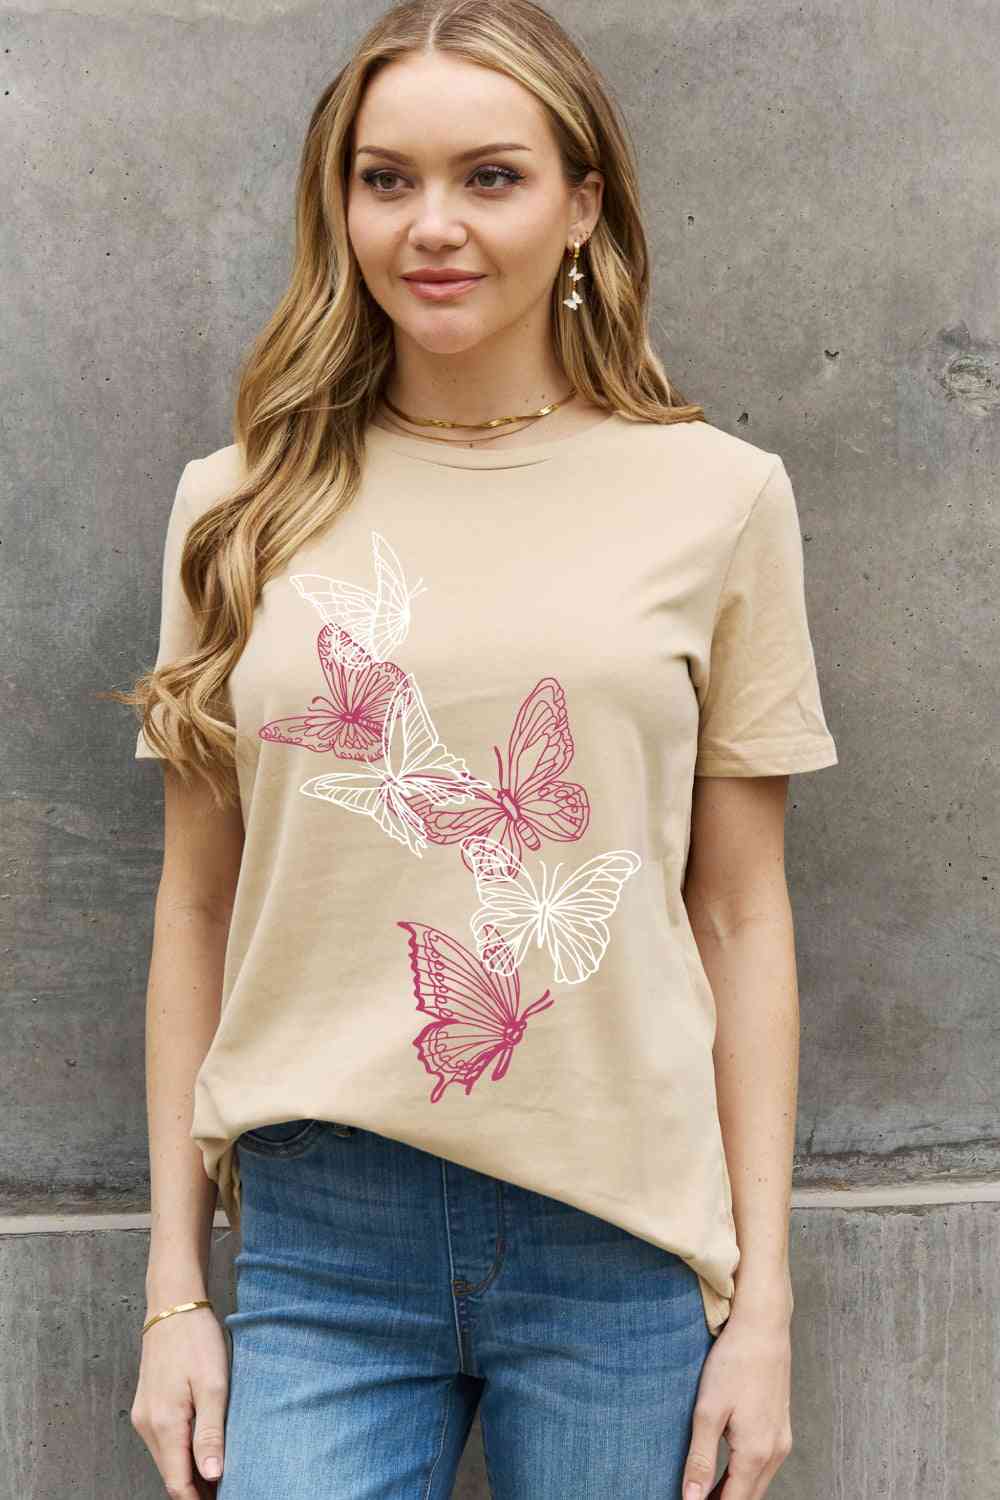 Butterfly Graphic Cotton Tee - T-Shirts - Shirts & Tops - 3 - 2024